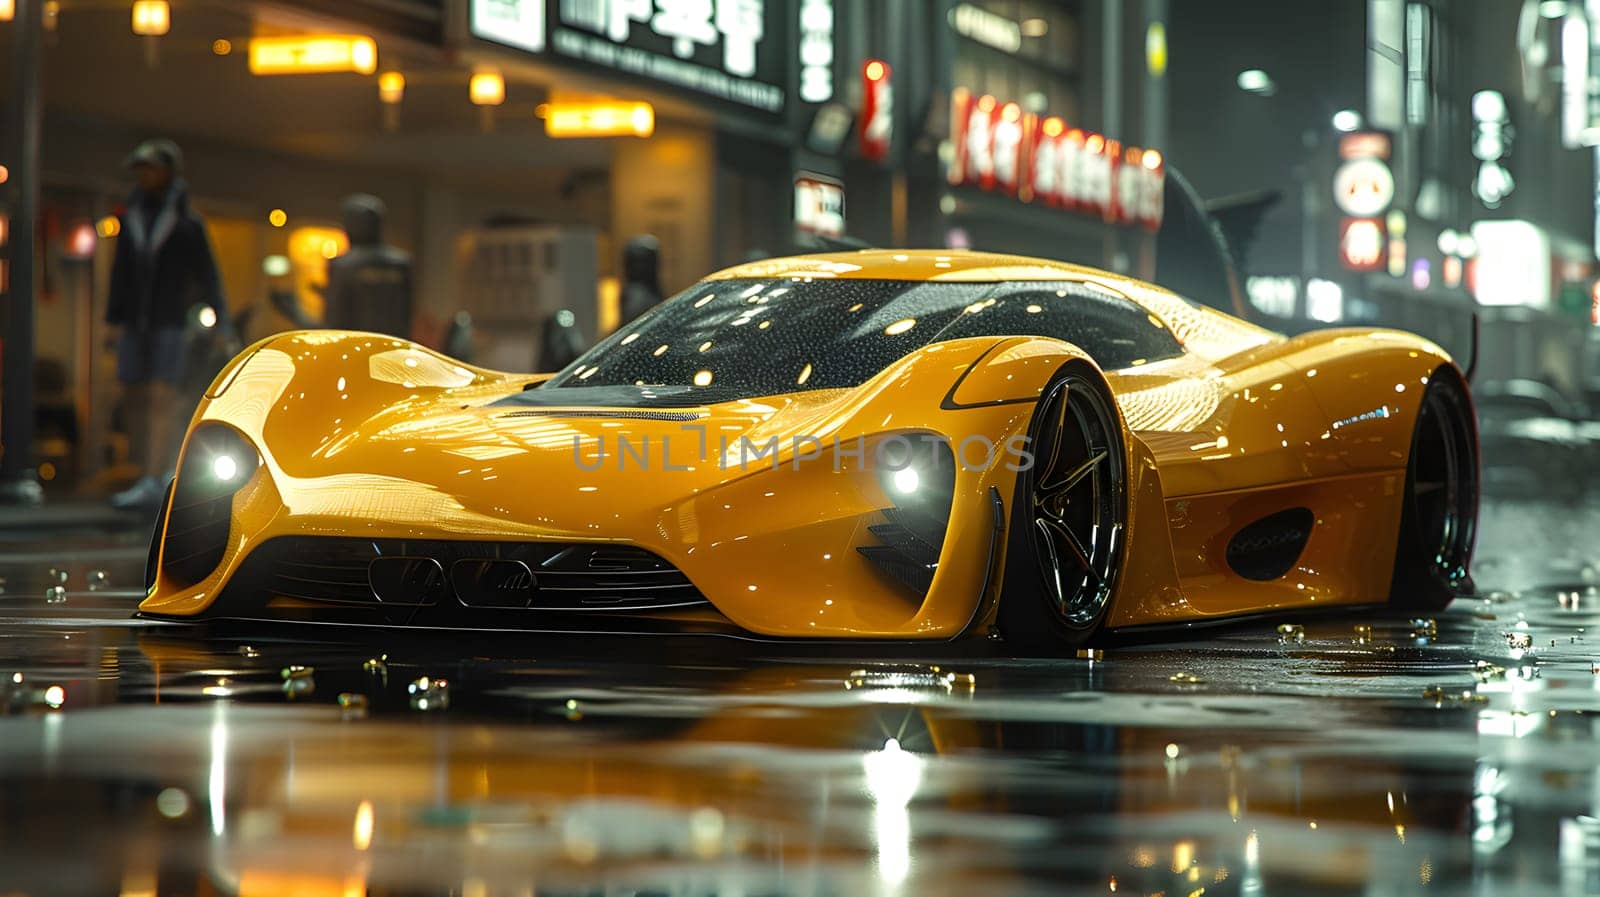 A vibrant yellow vehicle with sleek automotive design is navigating through the wet city streets at night, illuminated by its automotive lighting